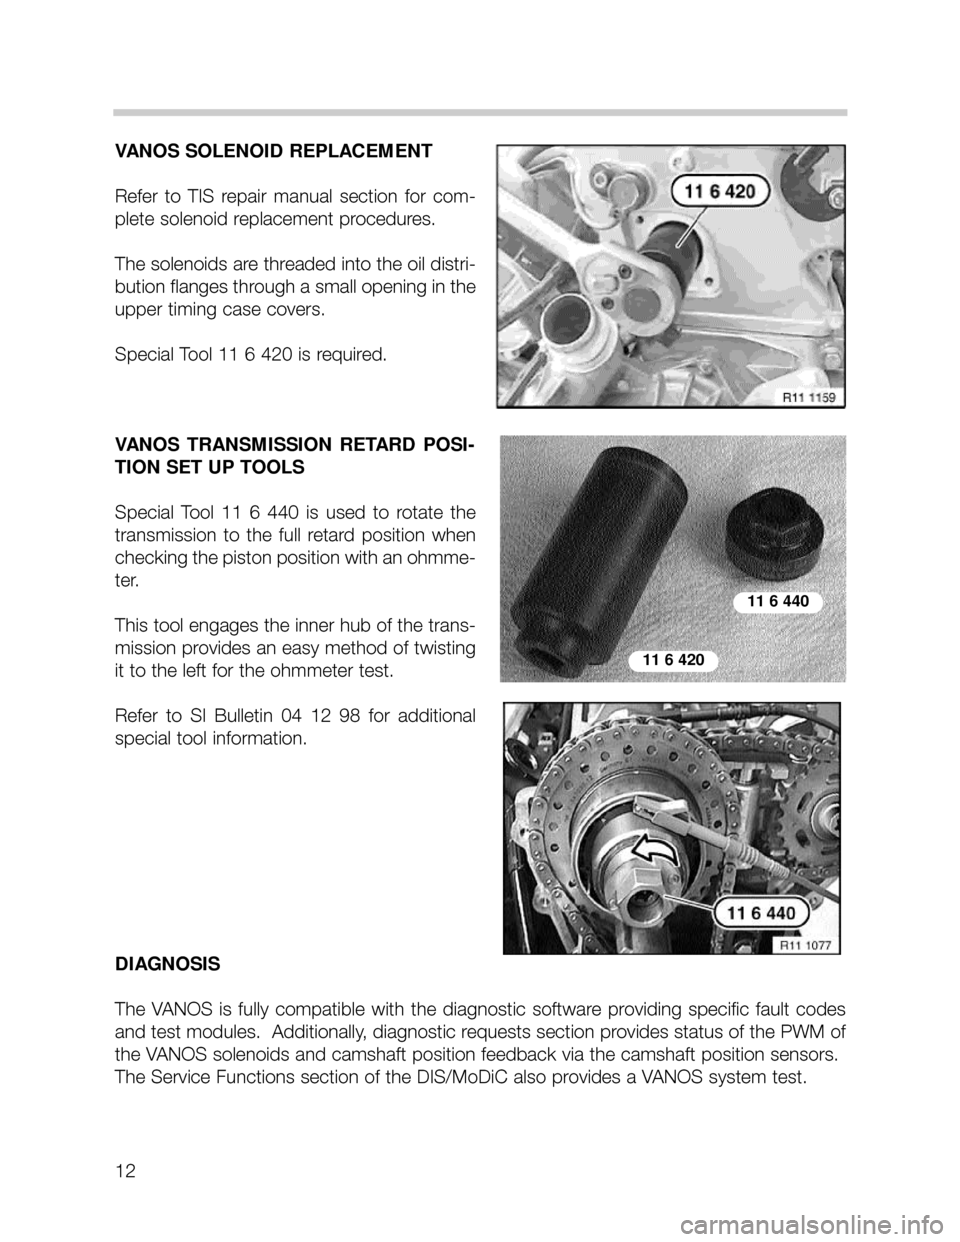 BMW X5 2005 E53 M62TU Engine Workshop Manual 12
VANOS SOLENOID REPLACEMENT
Refer  to  TIS  repair  manual  section  for  com-
plete solenoid replacement procedures.  
The solenoids are threaded into the oil distri-
bution flanges through a small